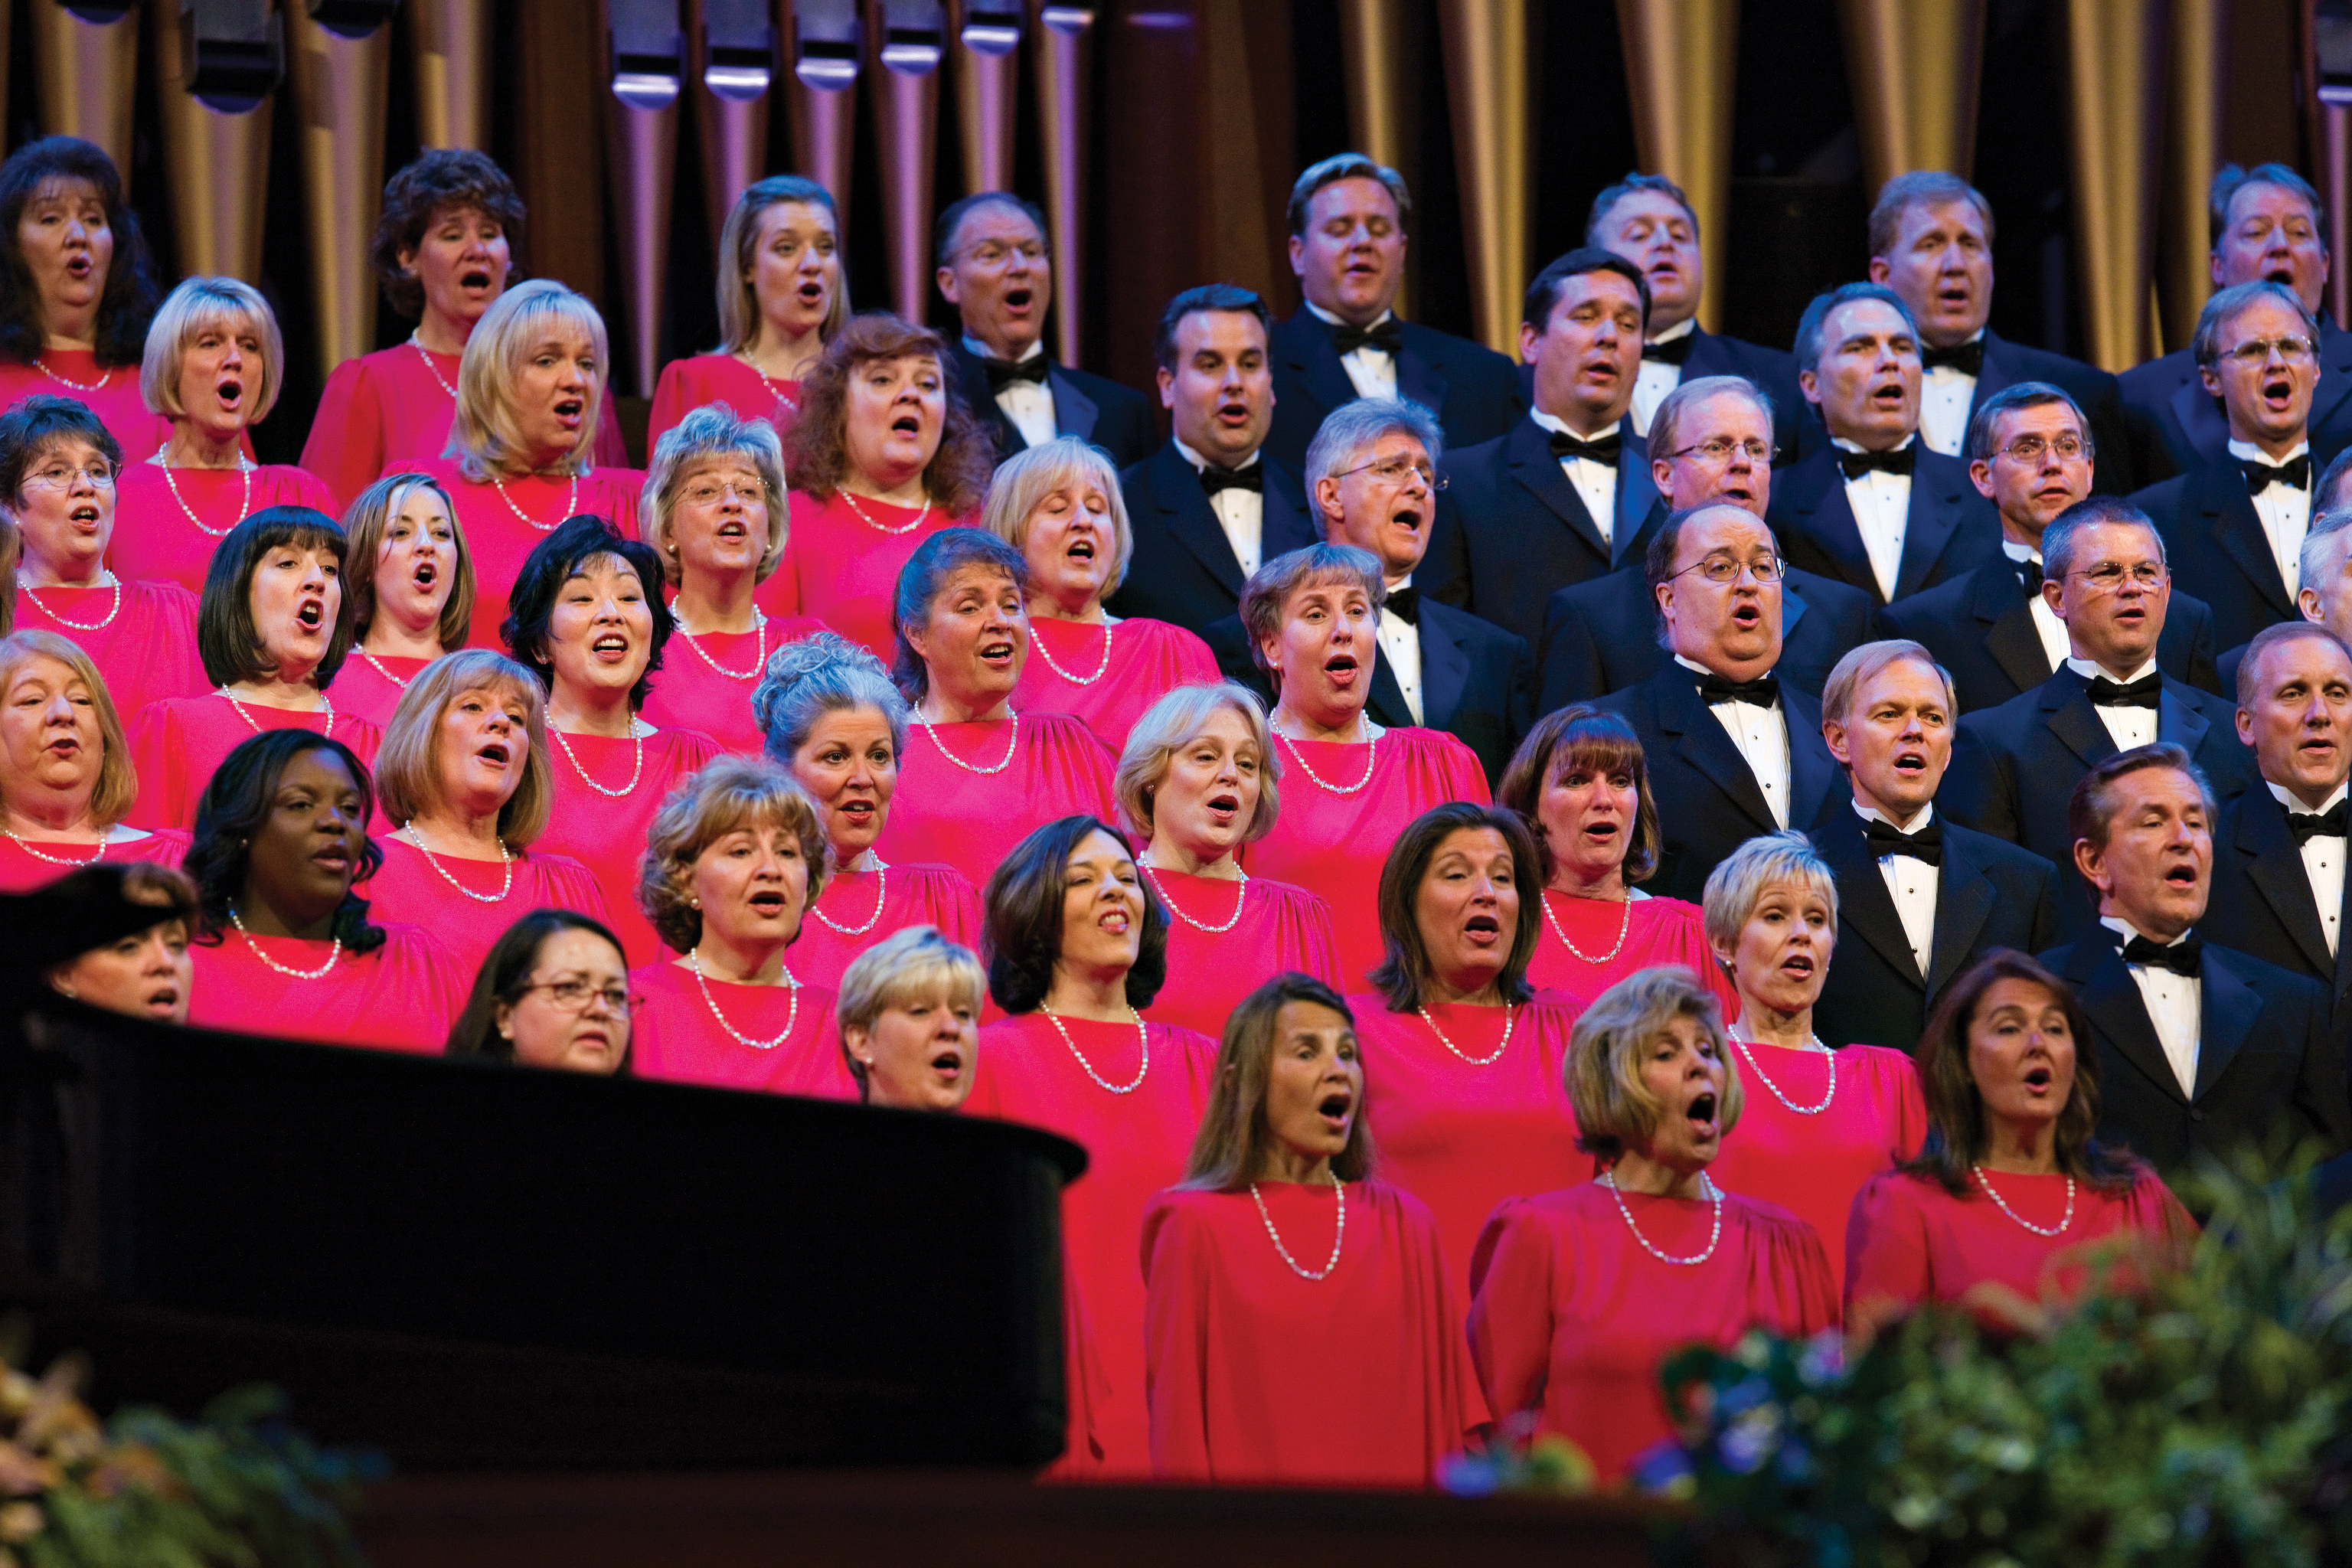 The Mormon Tabernacle Choir, with the women in red dresses and the men in black suits, singing in the Pioneer Day Commemoration Concert in July 2008.